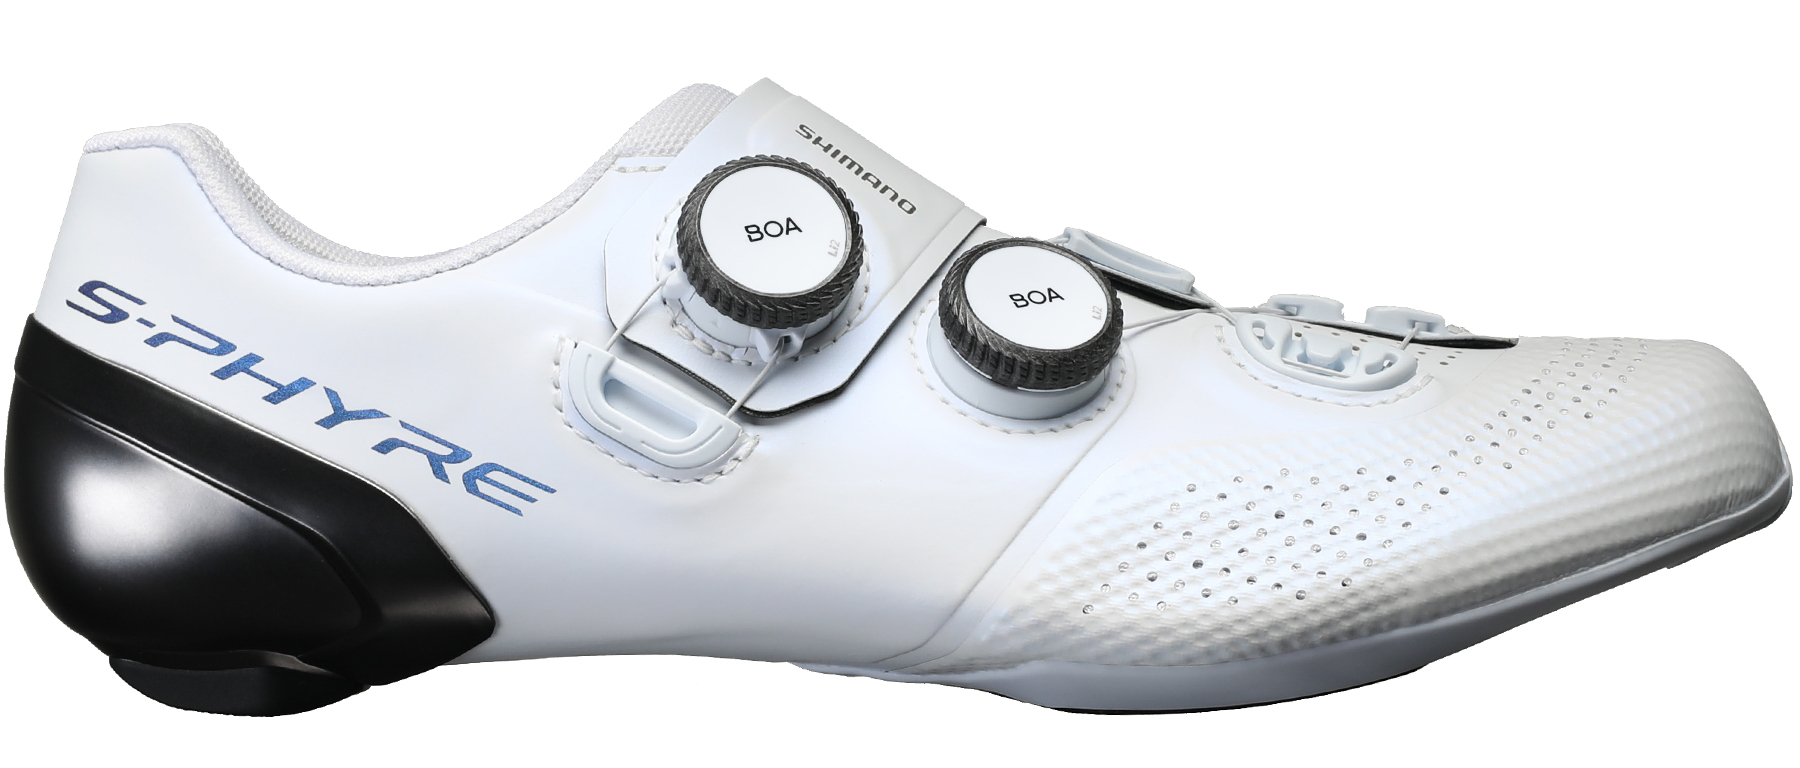 Shimano SH-RC902 S-Phyre Road Shoes Excel Sports | Shop Online 